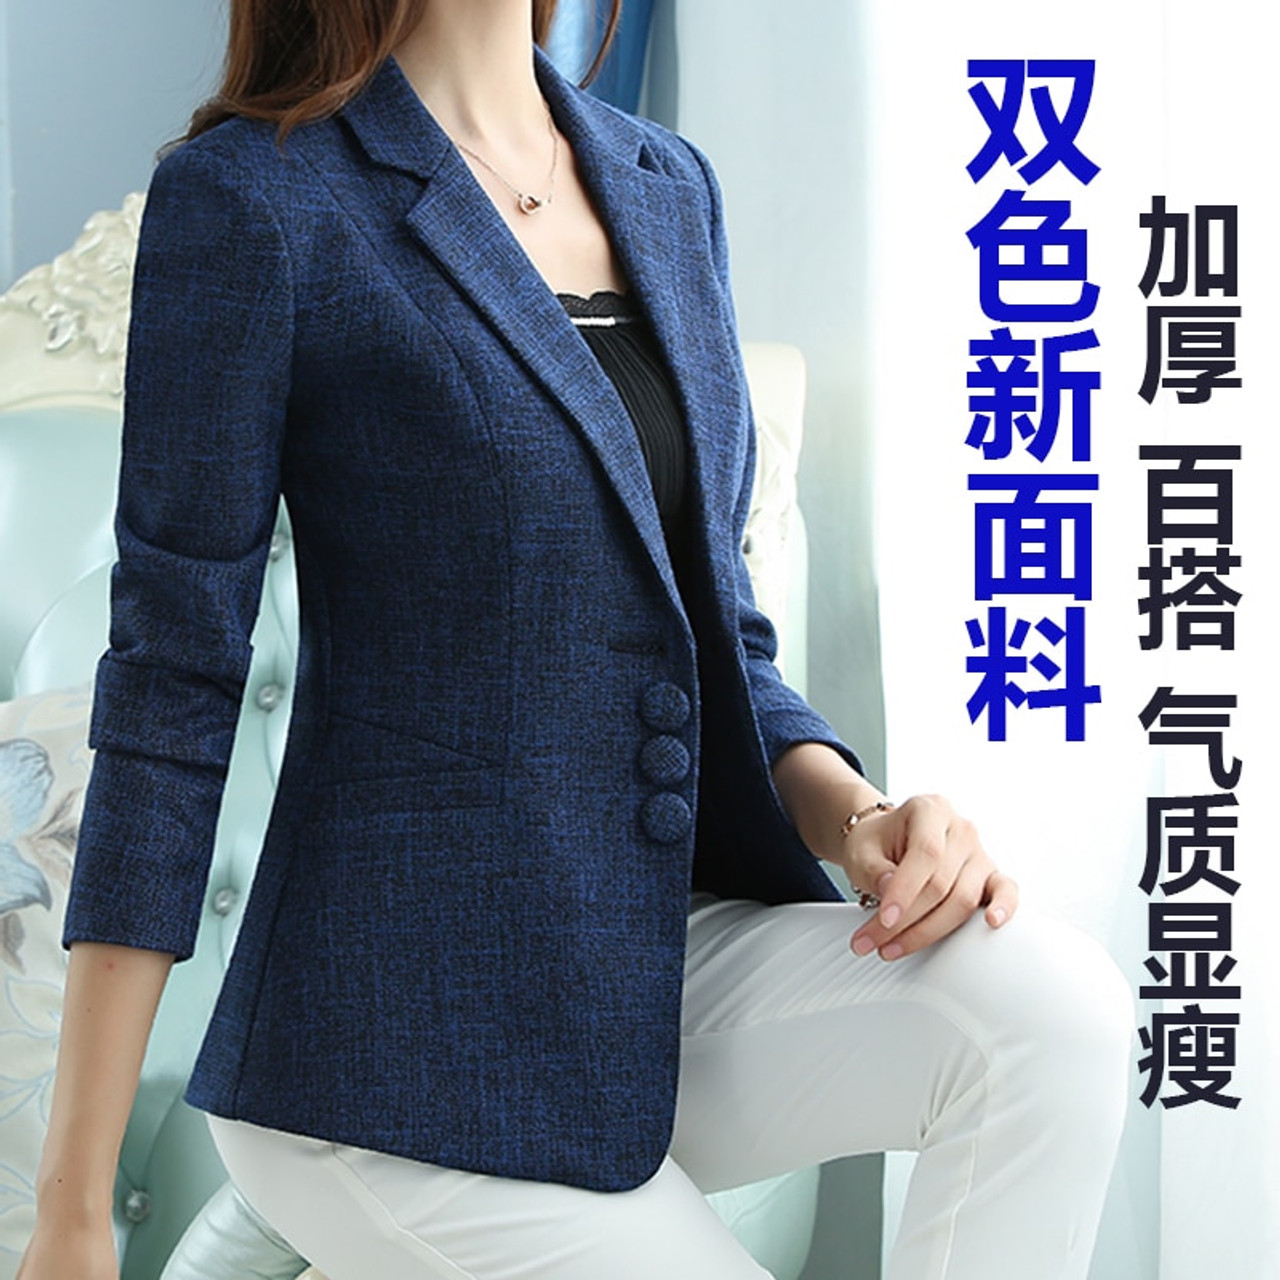 Jacket Womens Blazer For Mens in Nagercoil at best price by Goyal  Enterprises - Justdial